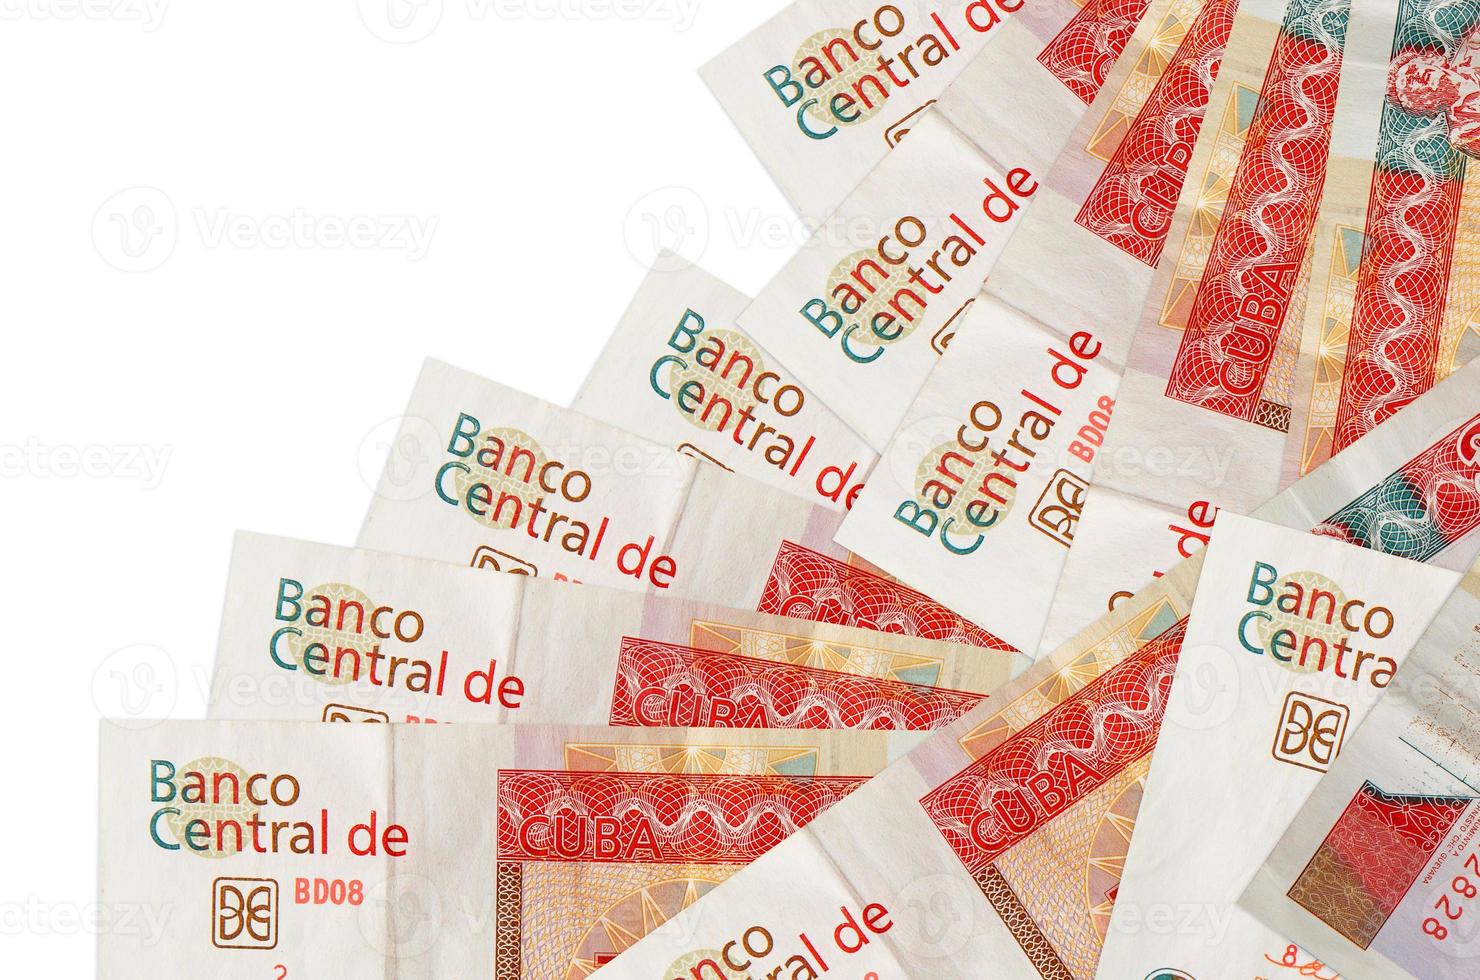 3 cuban pesos convertibles bills lies in different order isolated on white. Local banking or money making concept photo